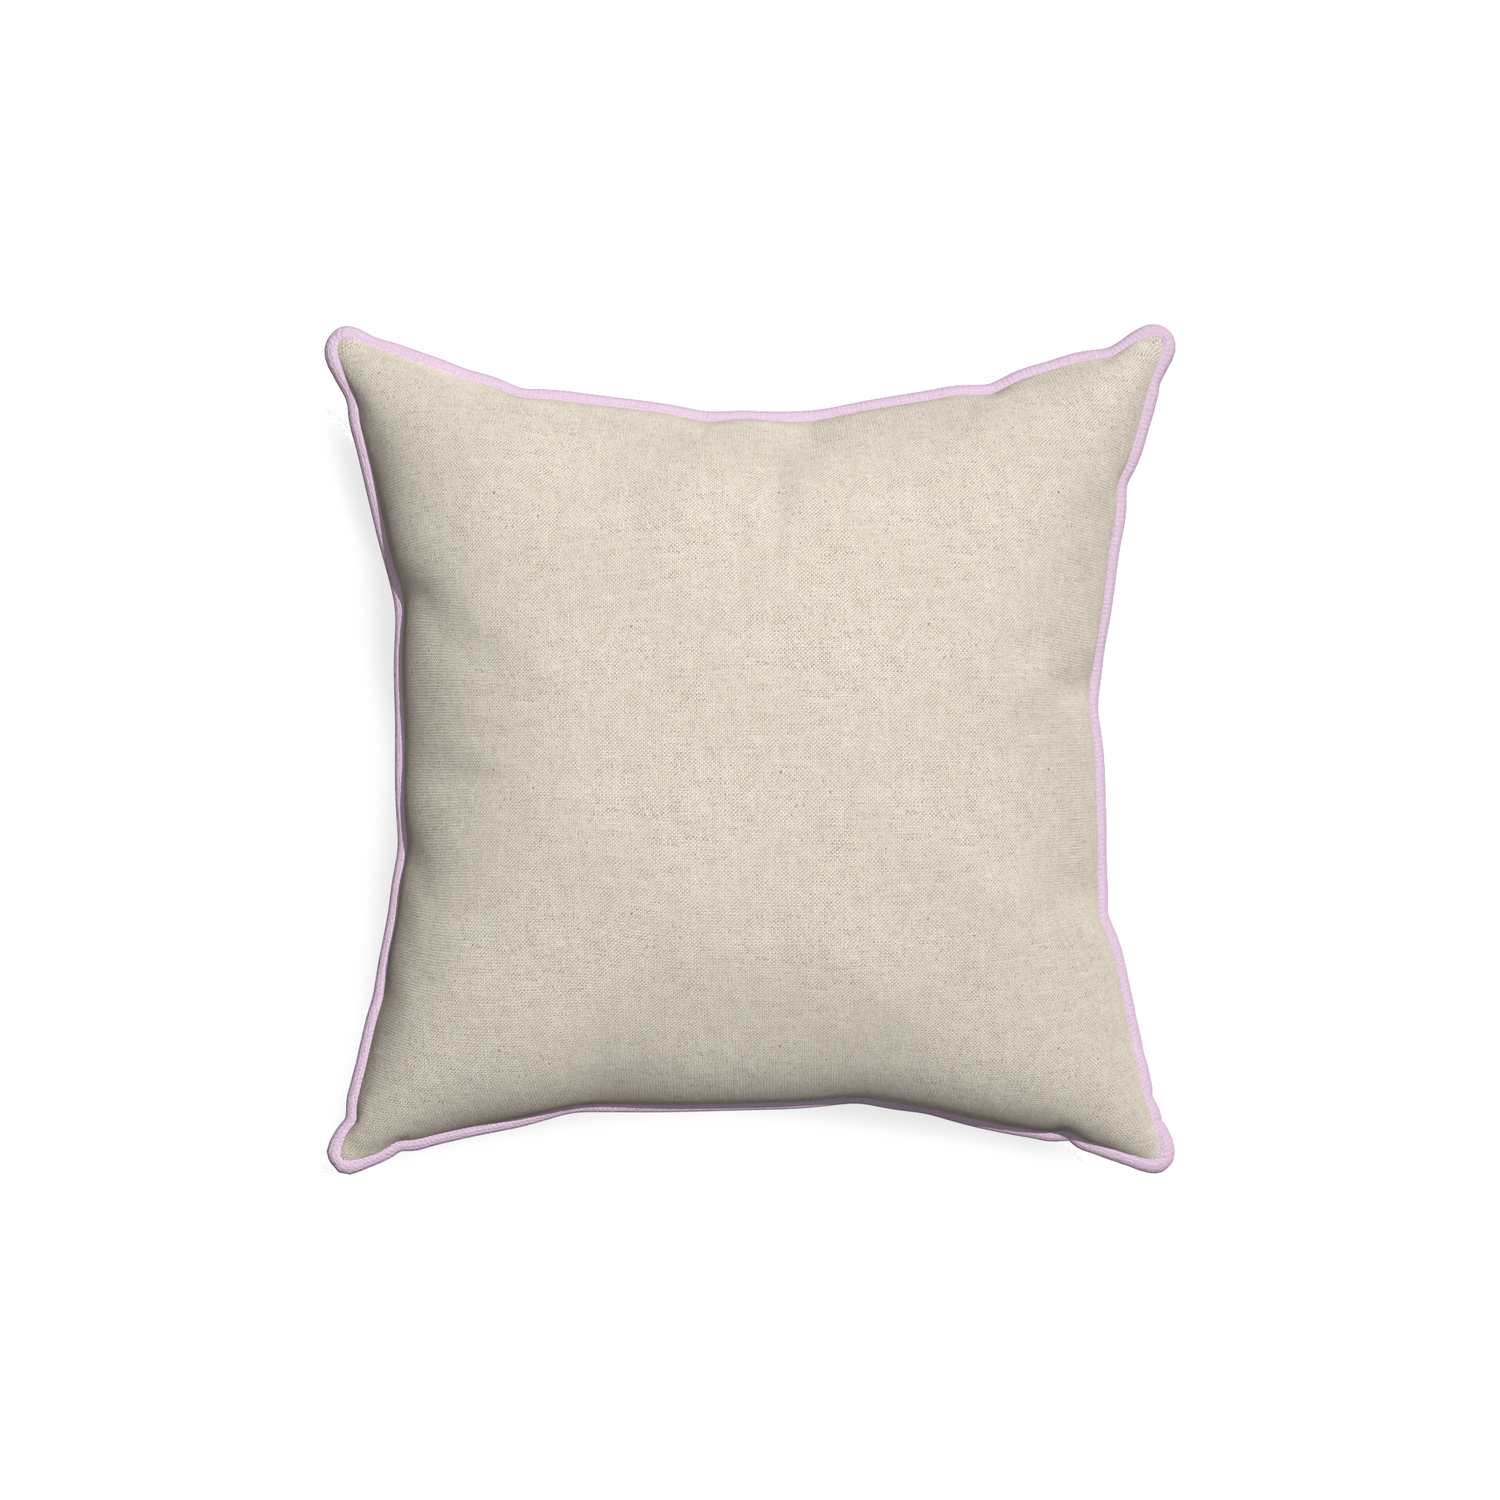 18-square oat custom pillow with l piping on white background